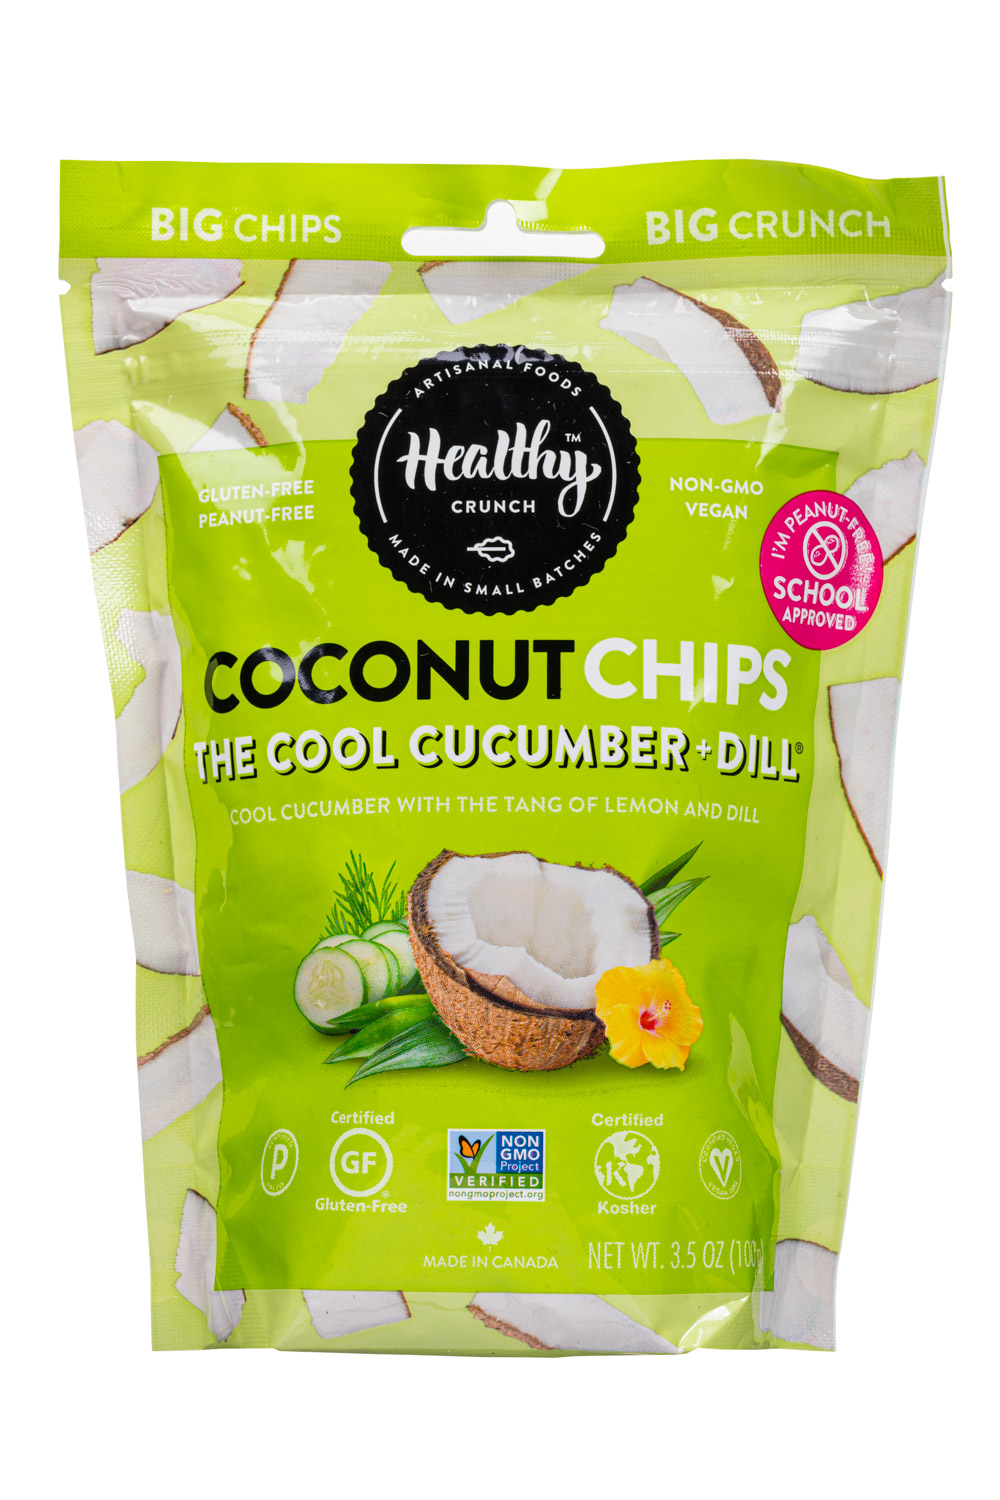 The Cool Cucumber + Dill